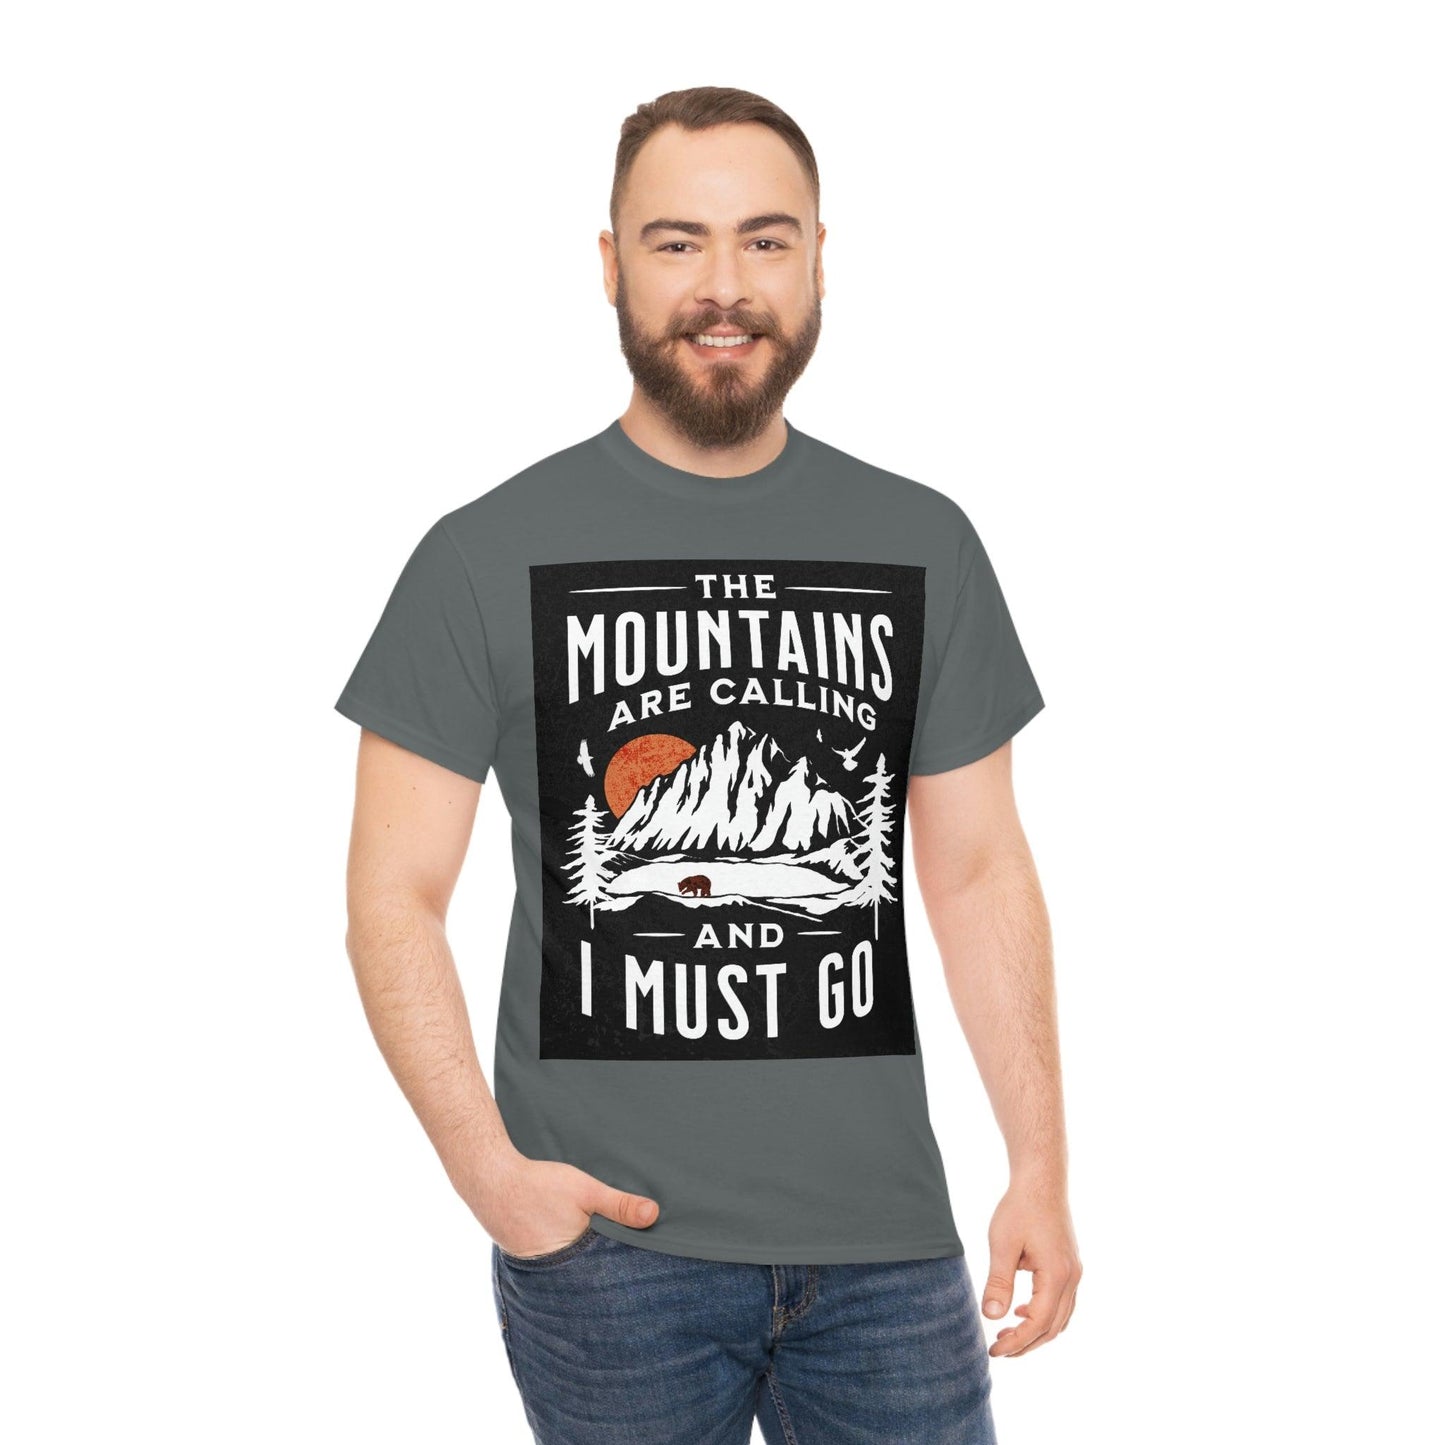 The Mountains are calling Tee